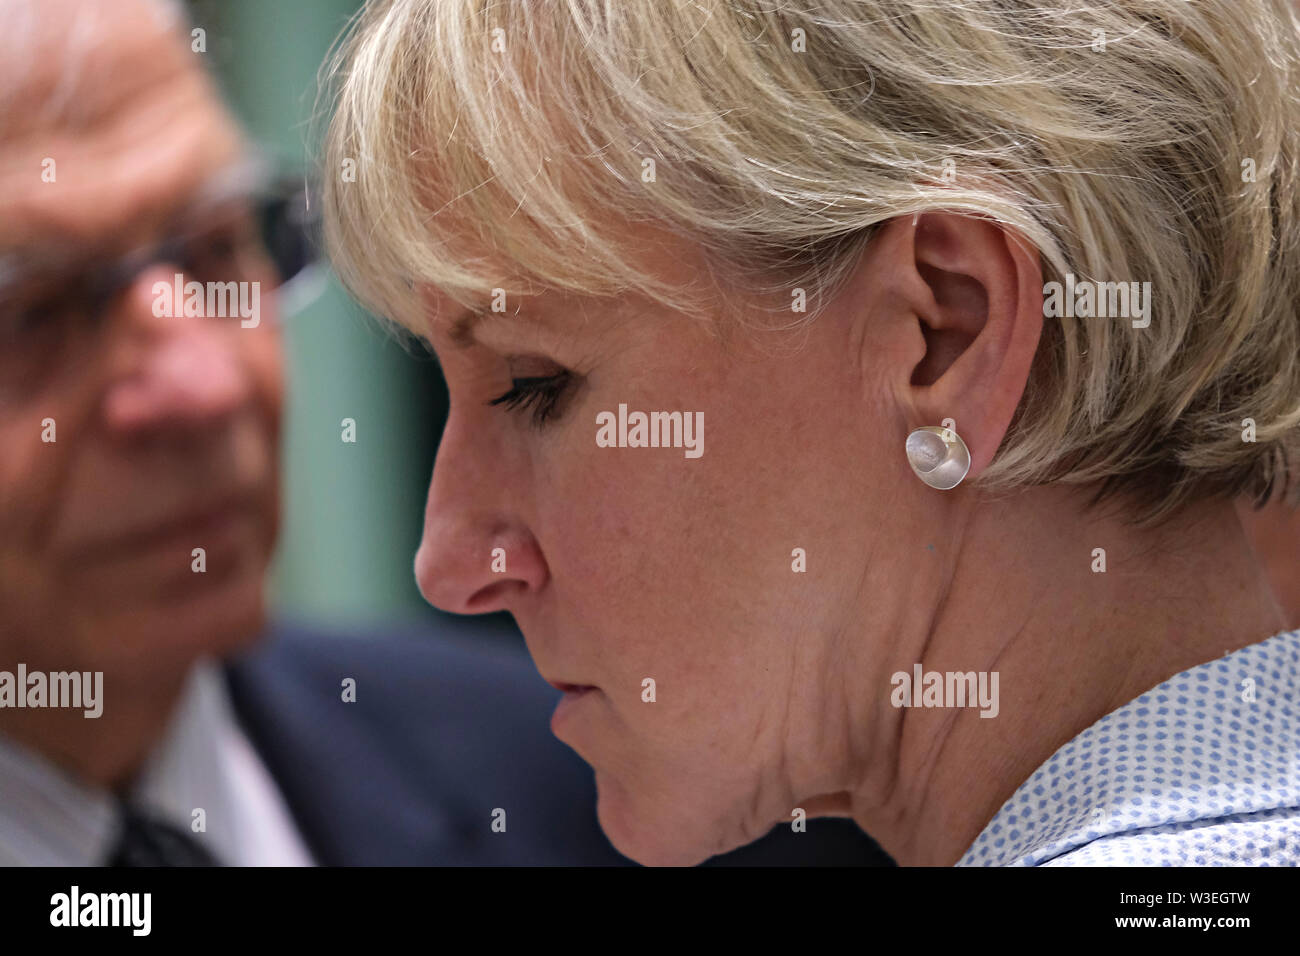 Brussels, Belgium, 15th July 2019. Ministers of Foreign Affairs of Sweden  Margot Wallstrom attends in an European Union Foreign Affairs Council meeting. Credit: ALEXANDROS MICHAILIDIS/Alamy Live News Stock Photo